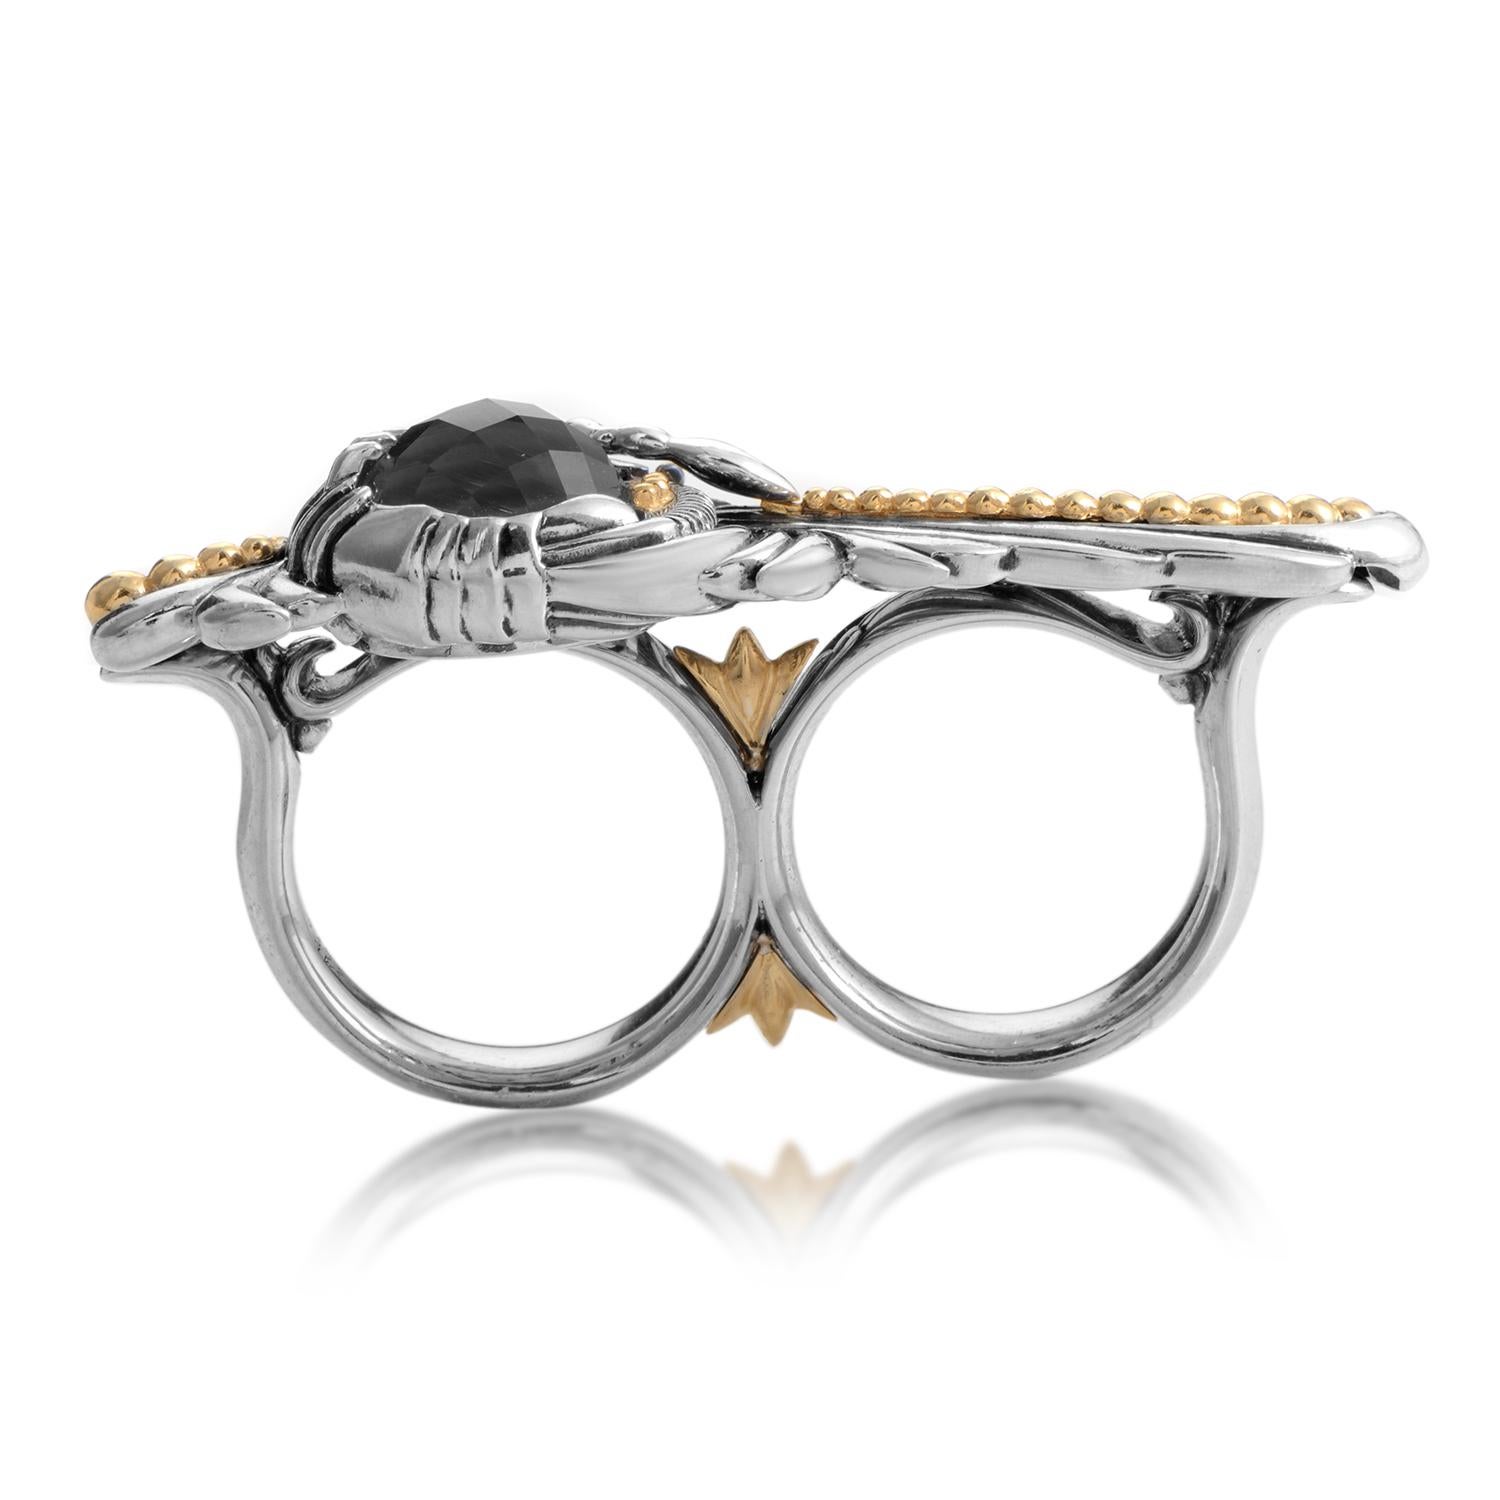 Magical in its elegance and ethereal colors, this gracefully designed Stephen Webster two-finger ring is a stunning example of classic style being made contemporary. The focal point is the urbane brooch style design that holds a faceted stone gray